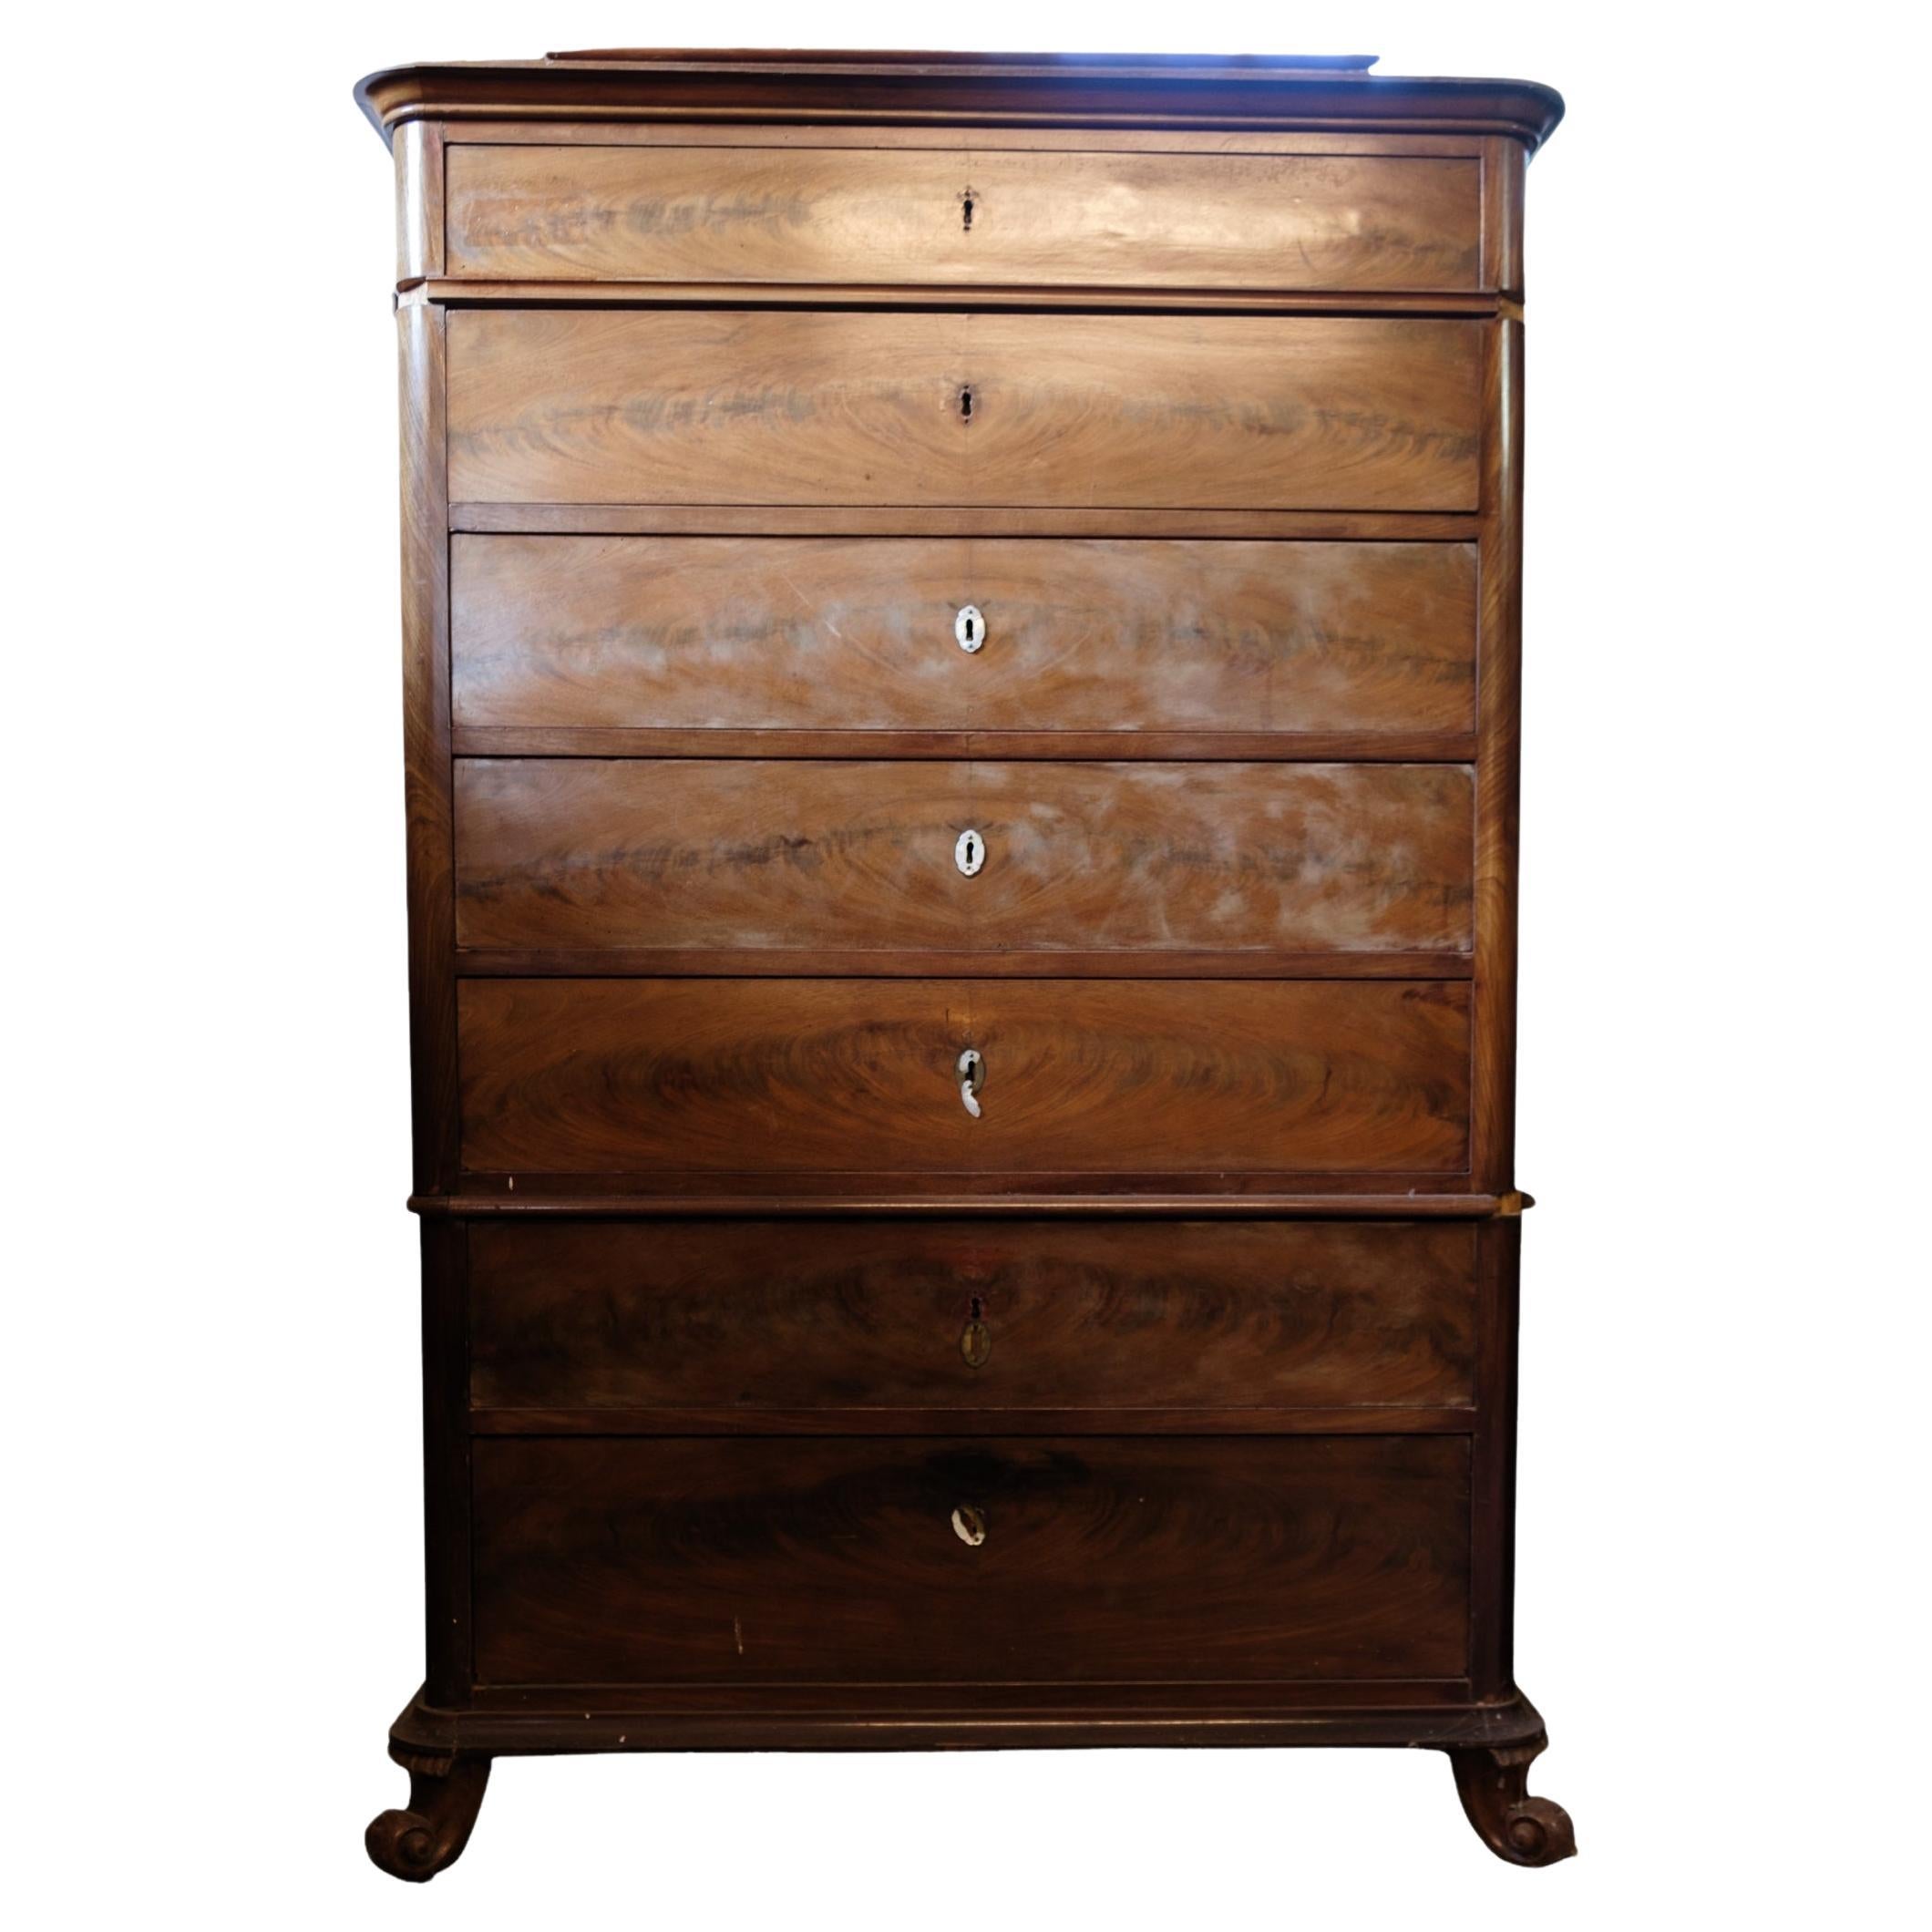 High mahogany chest of drawers from around the 1840s